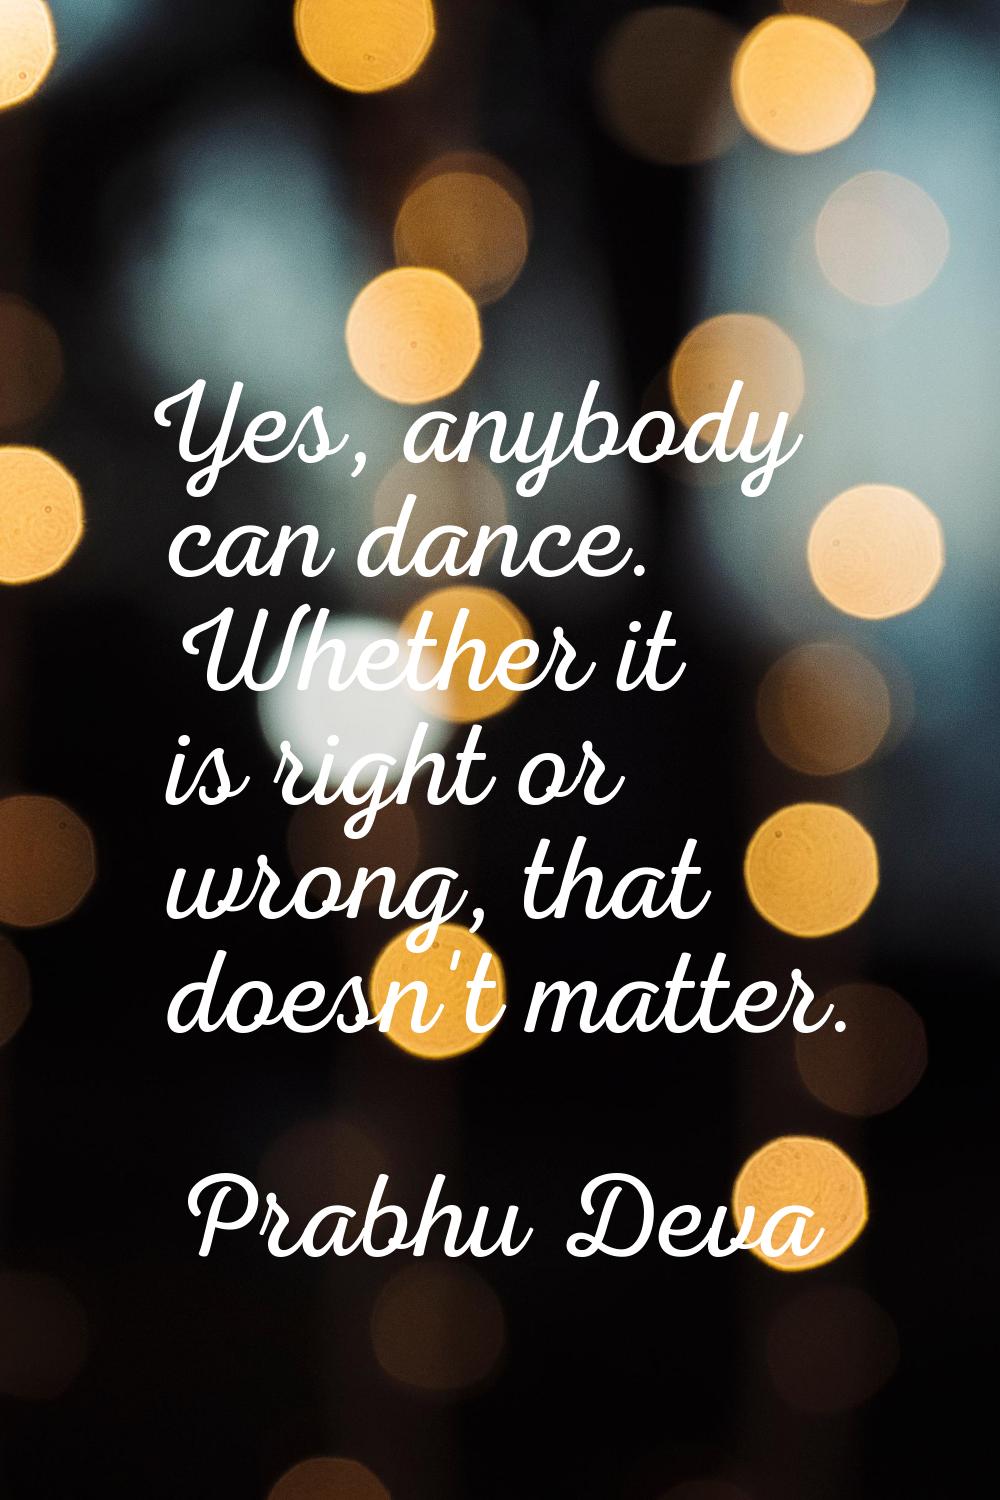 Yes, anybody can dance. Whether it is right or wrong, that doesn't matter.